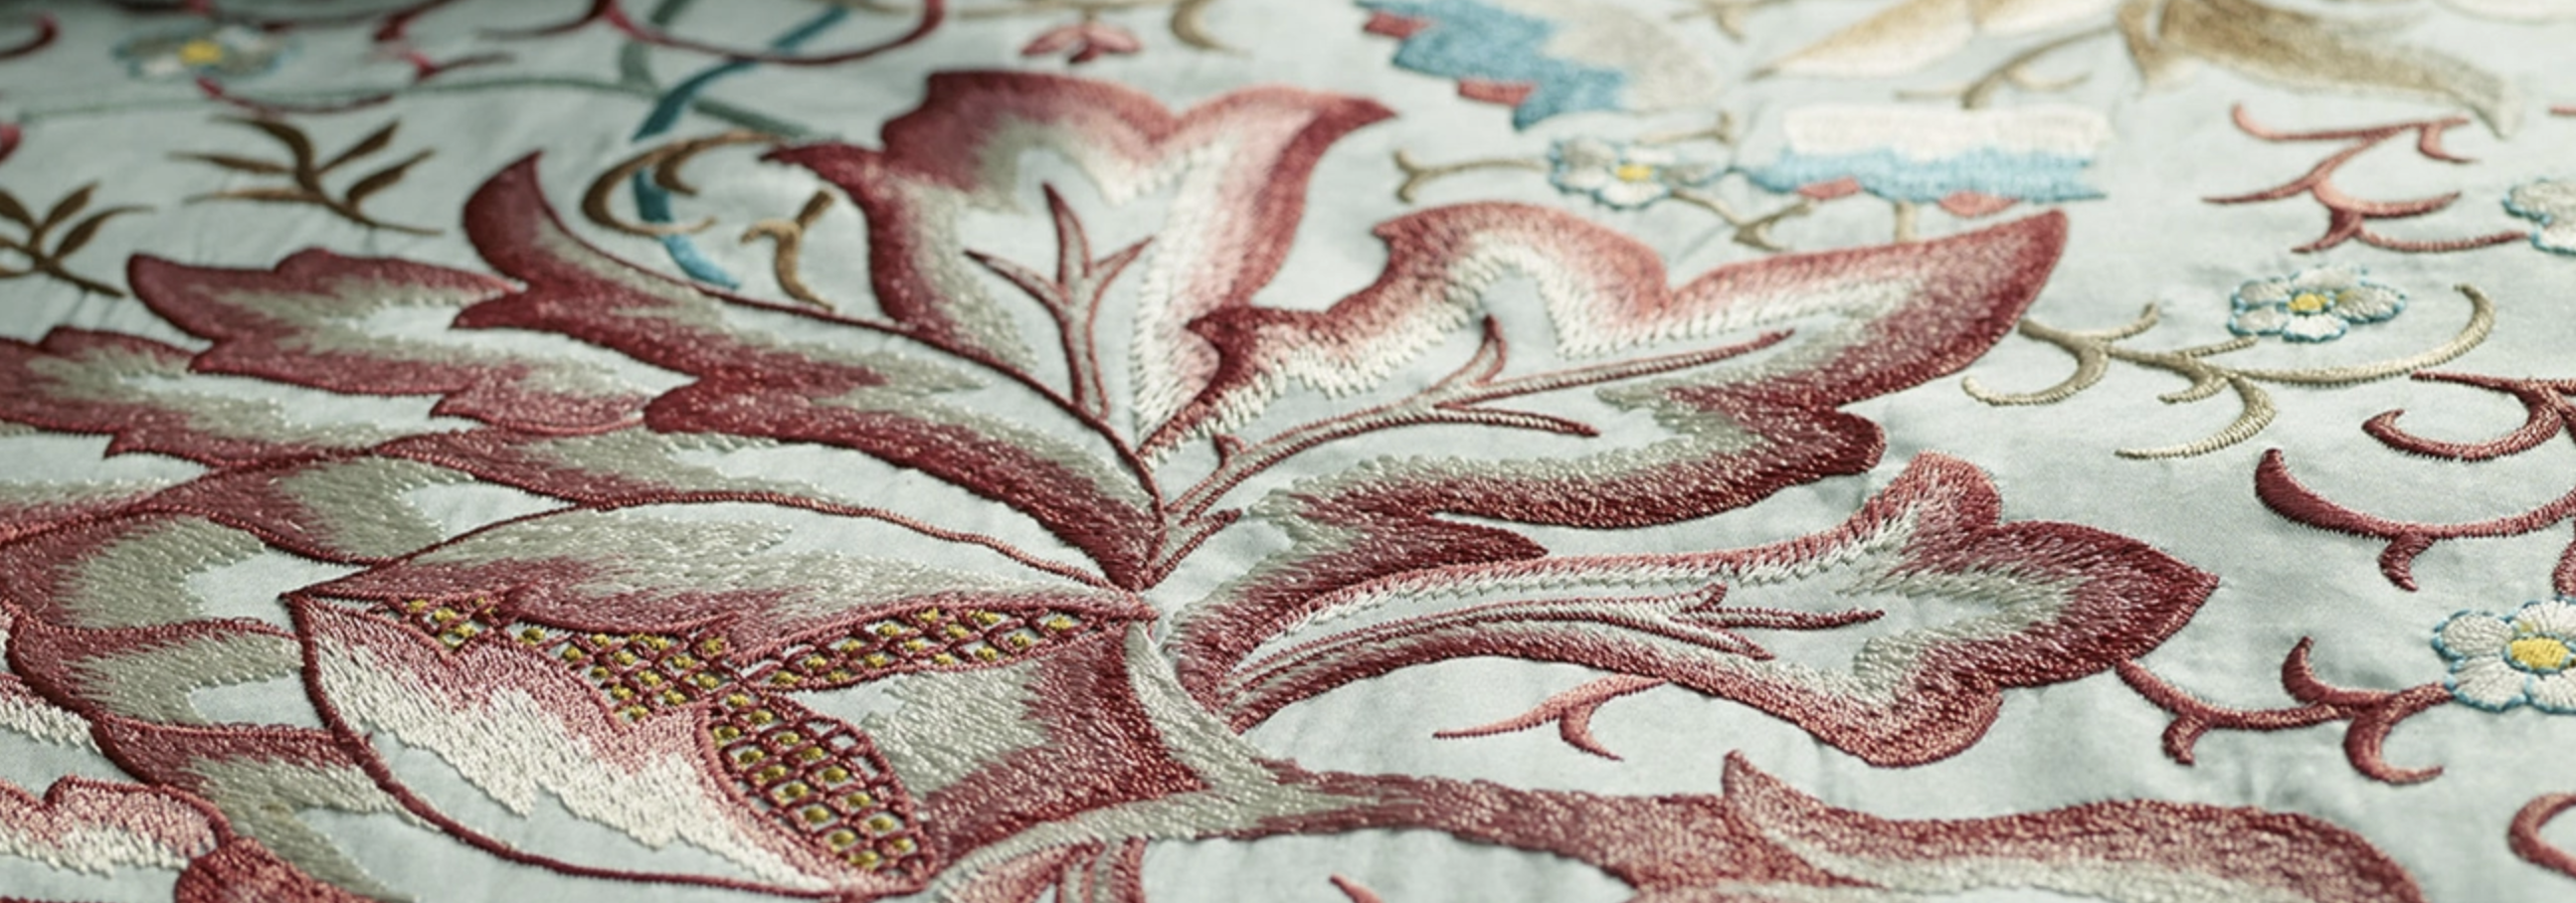 Embroidery: History and How It's Made